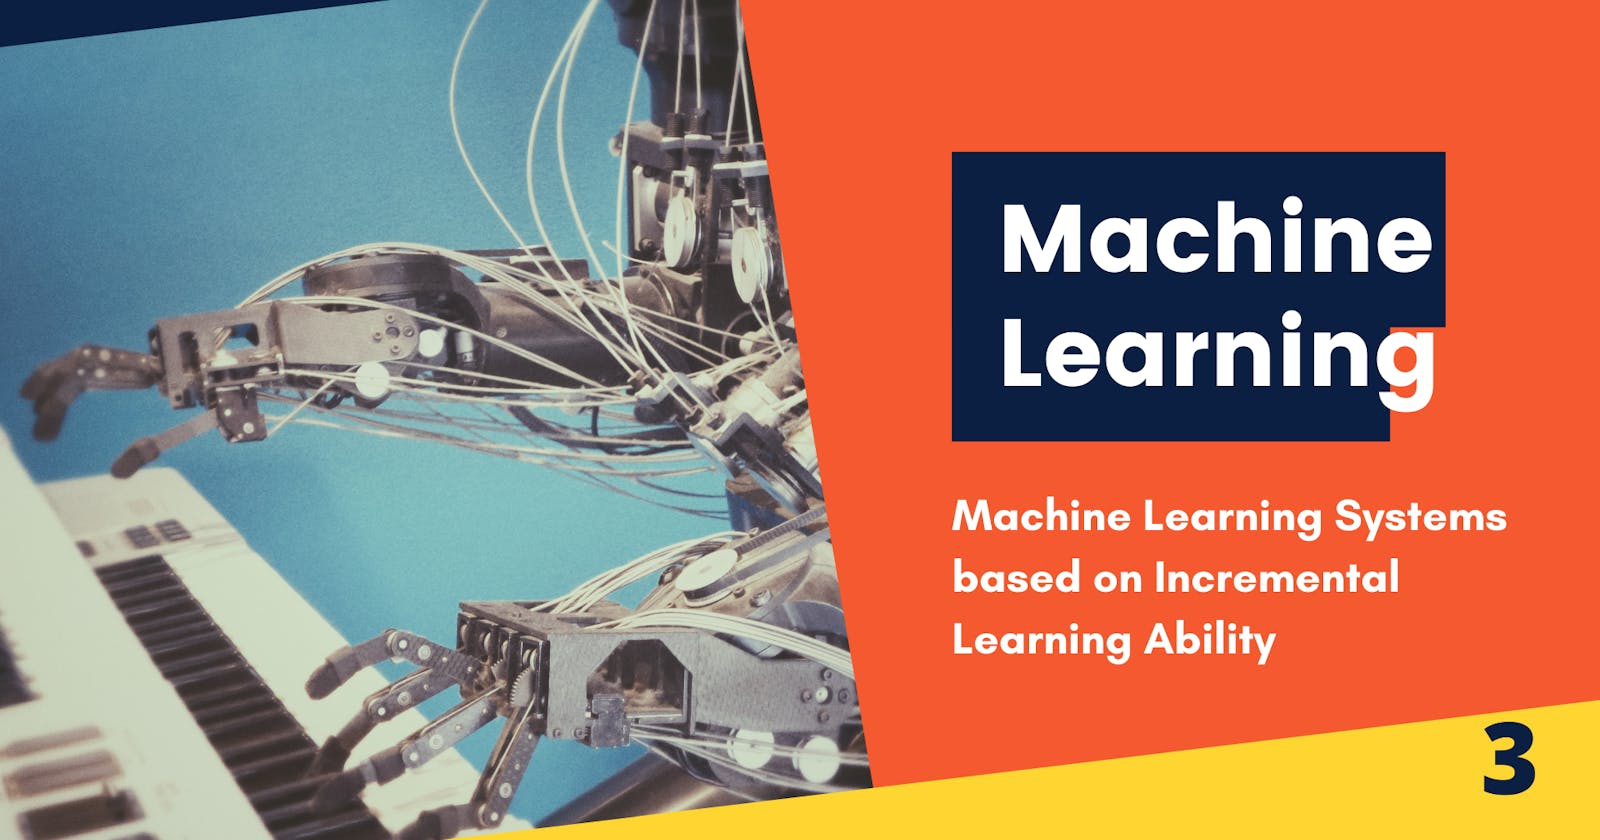 Machine Learning Systems based on Incremental Learning Ability